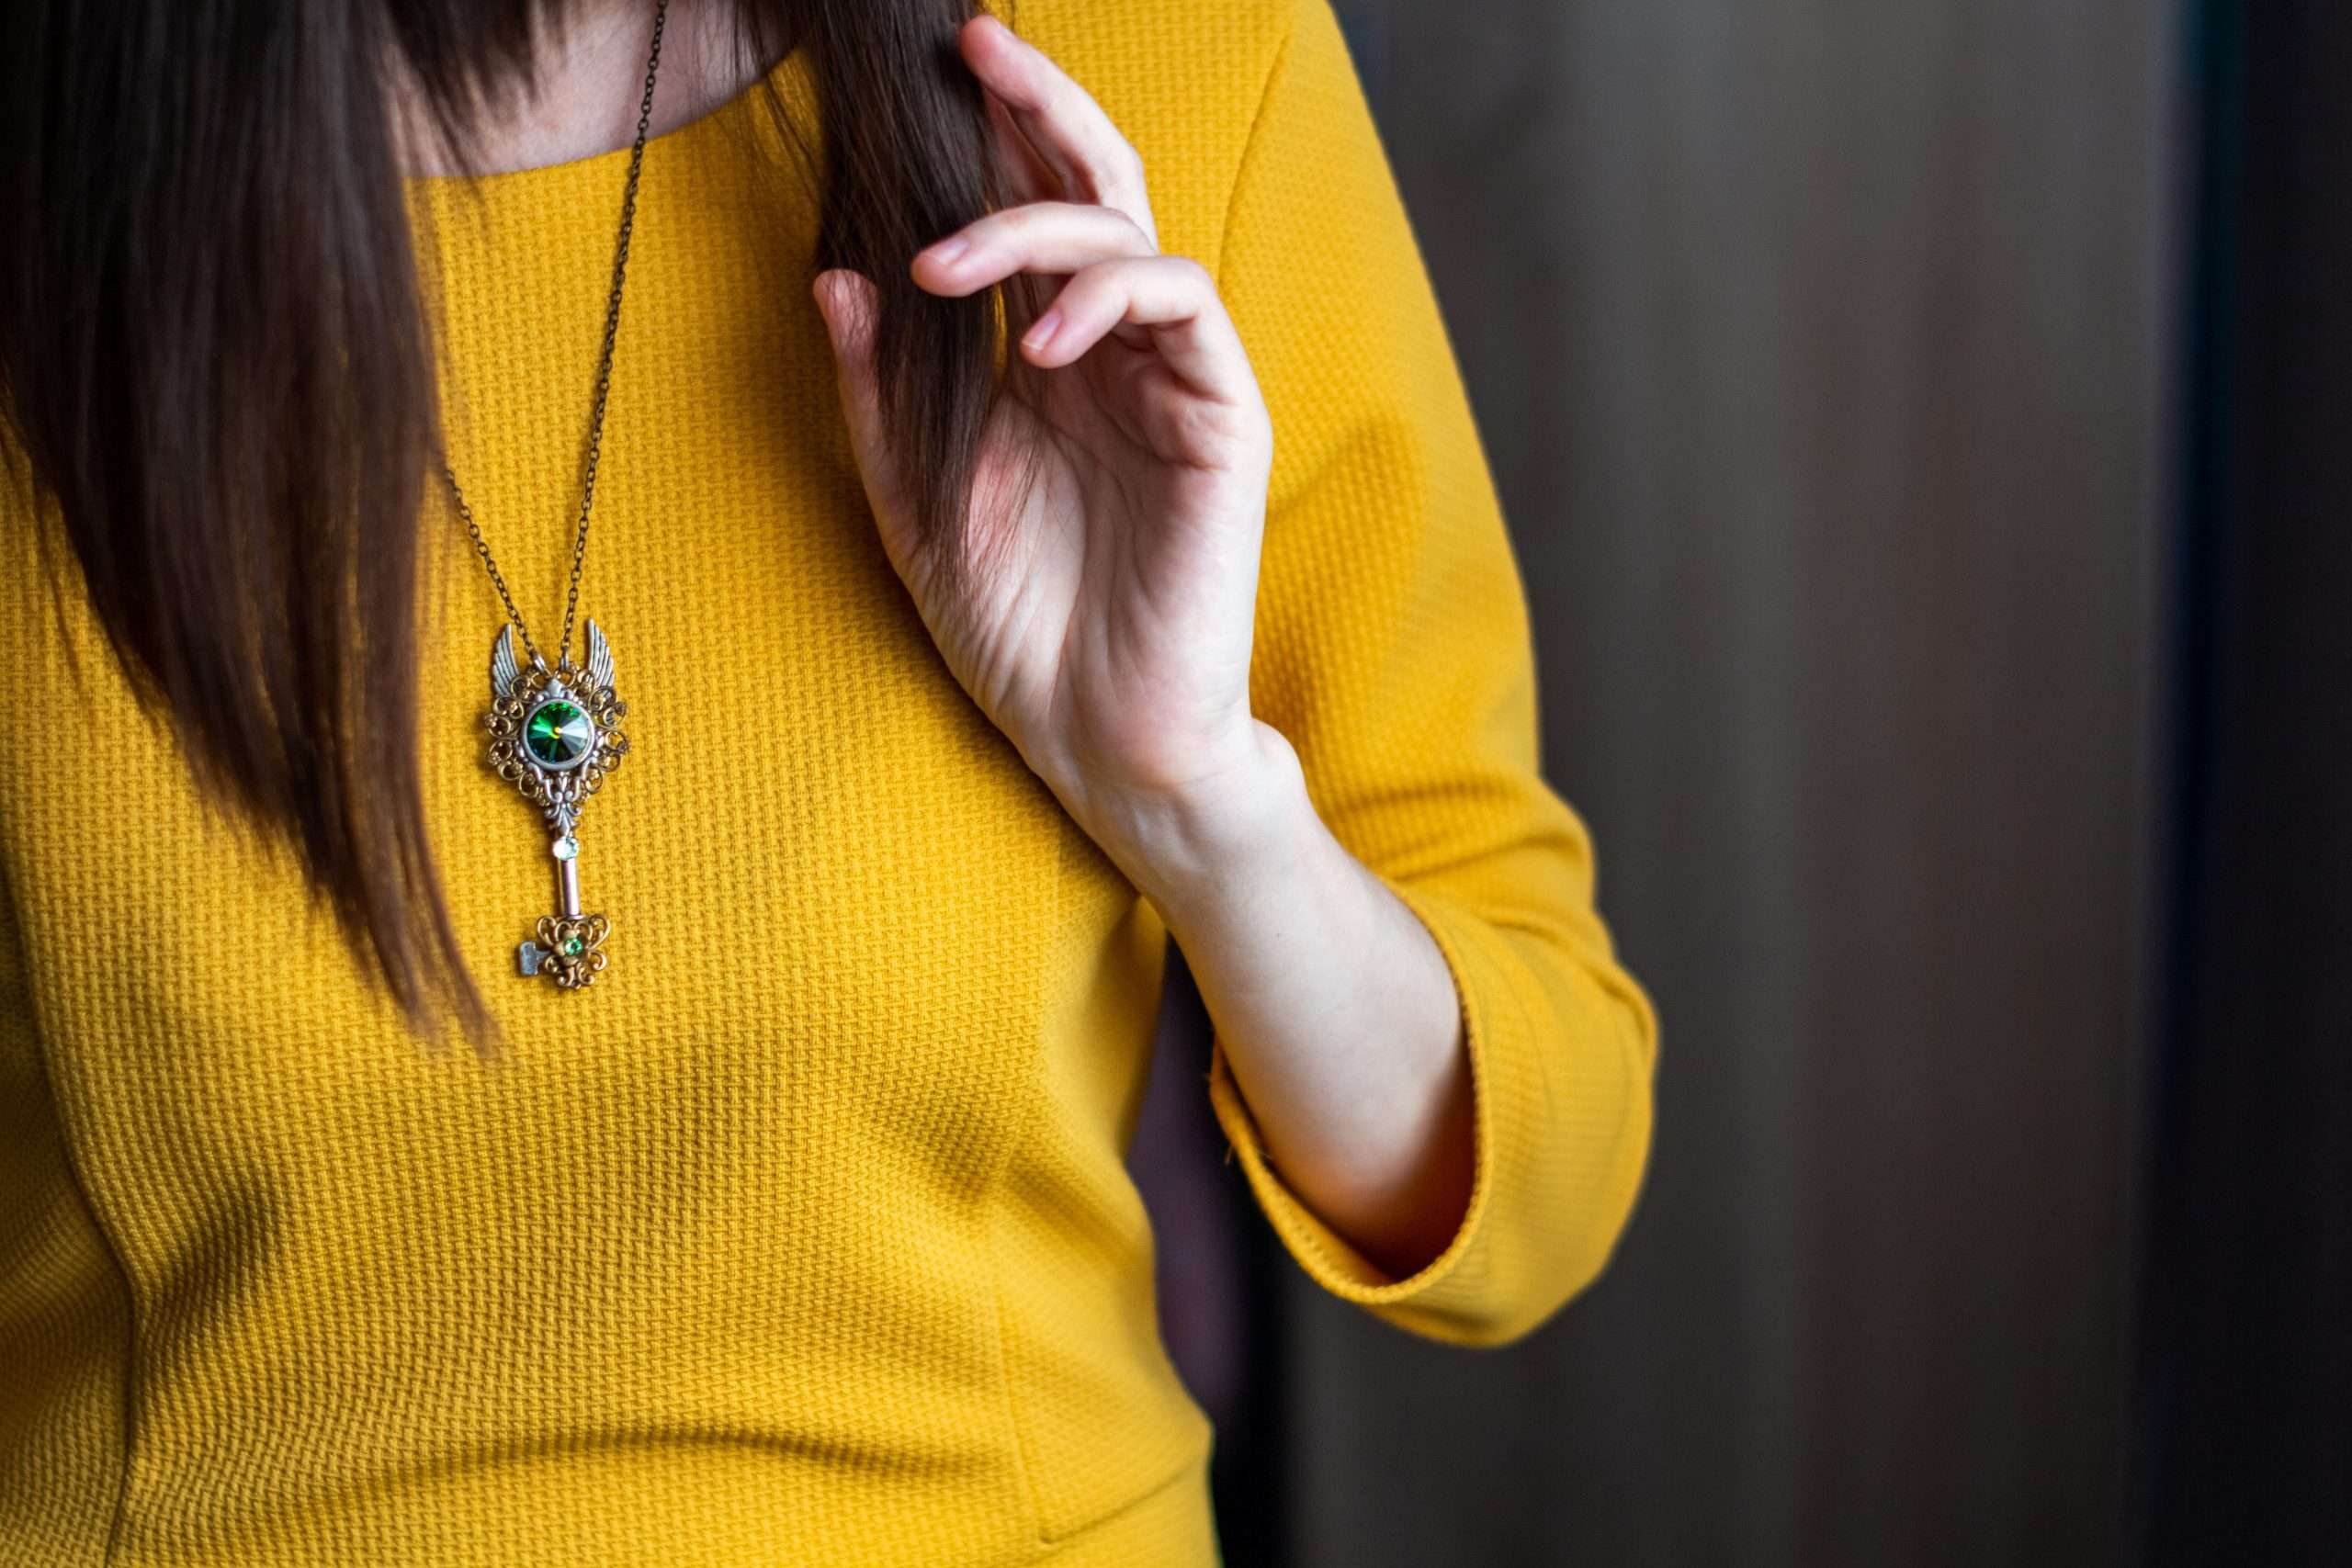 What Does It Mean When A Girl Wears A Key Necklace? - A Fashion Blog